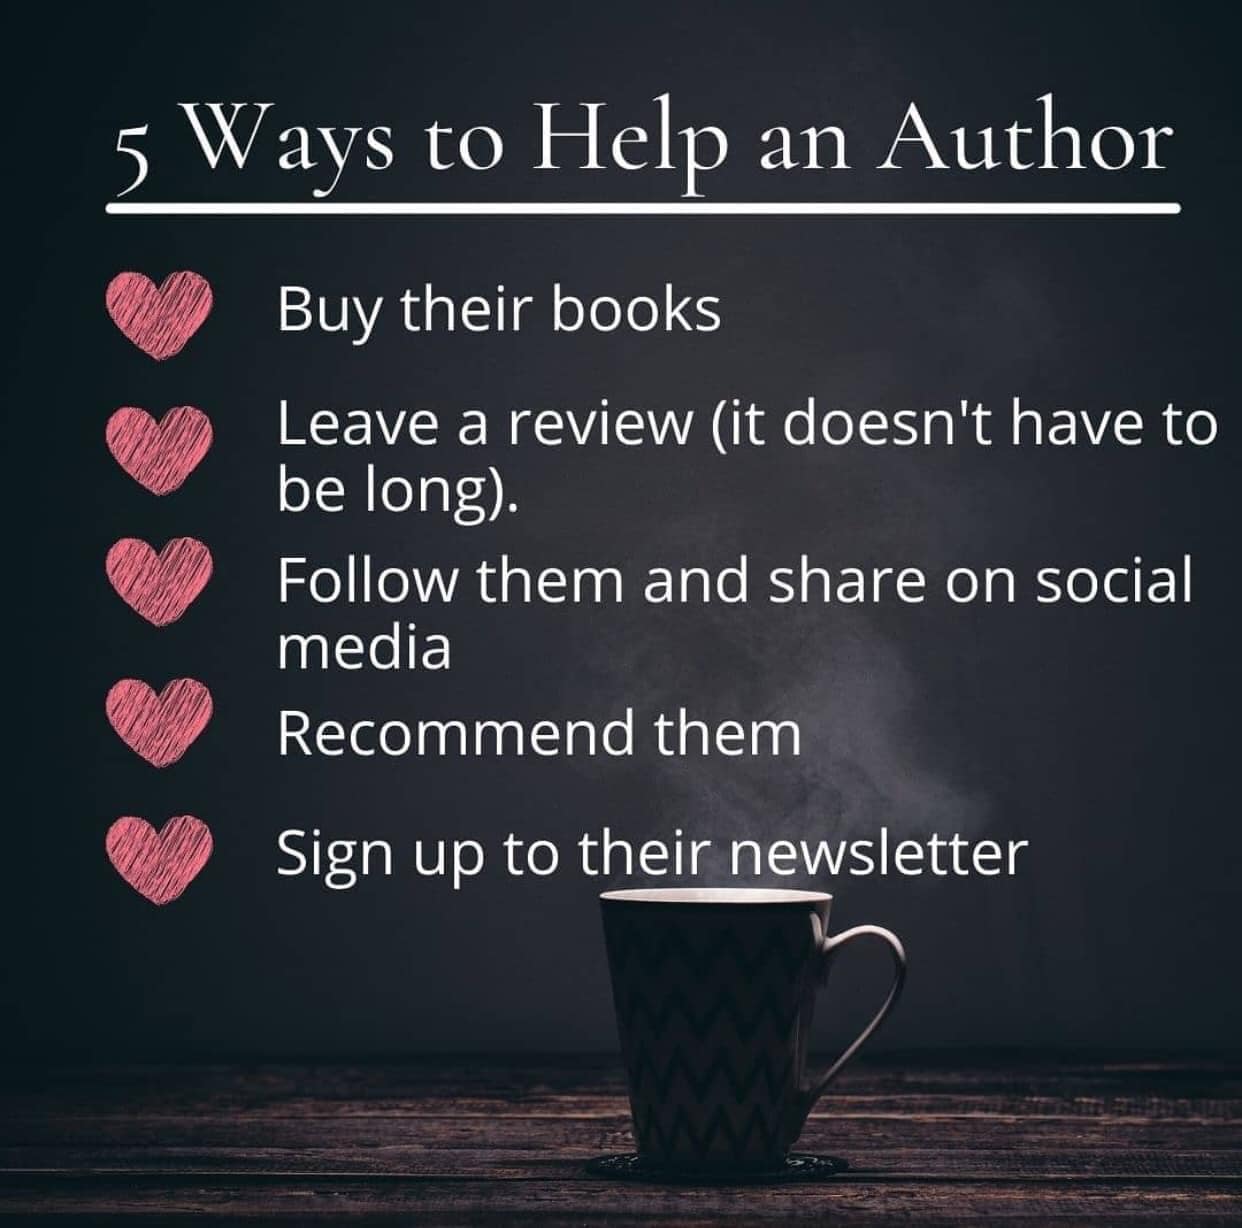 Ways to help an Author poster